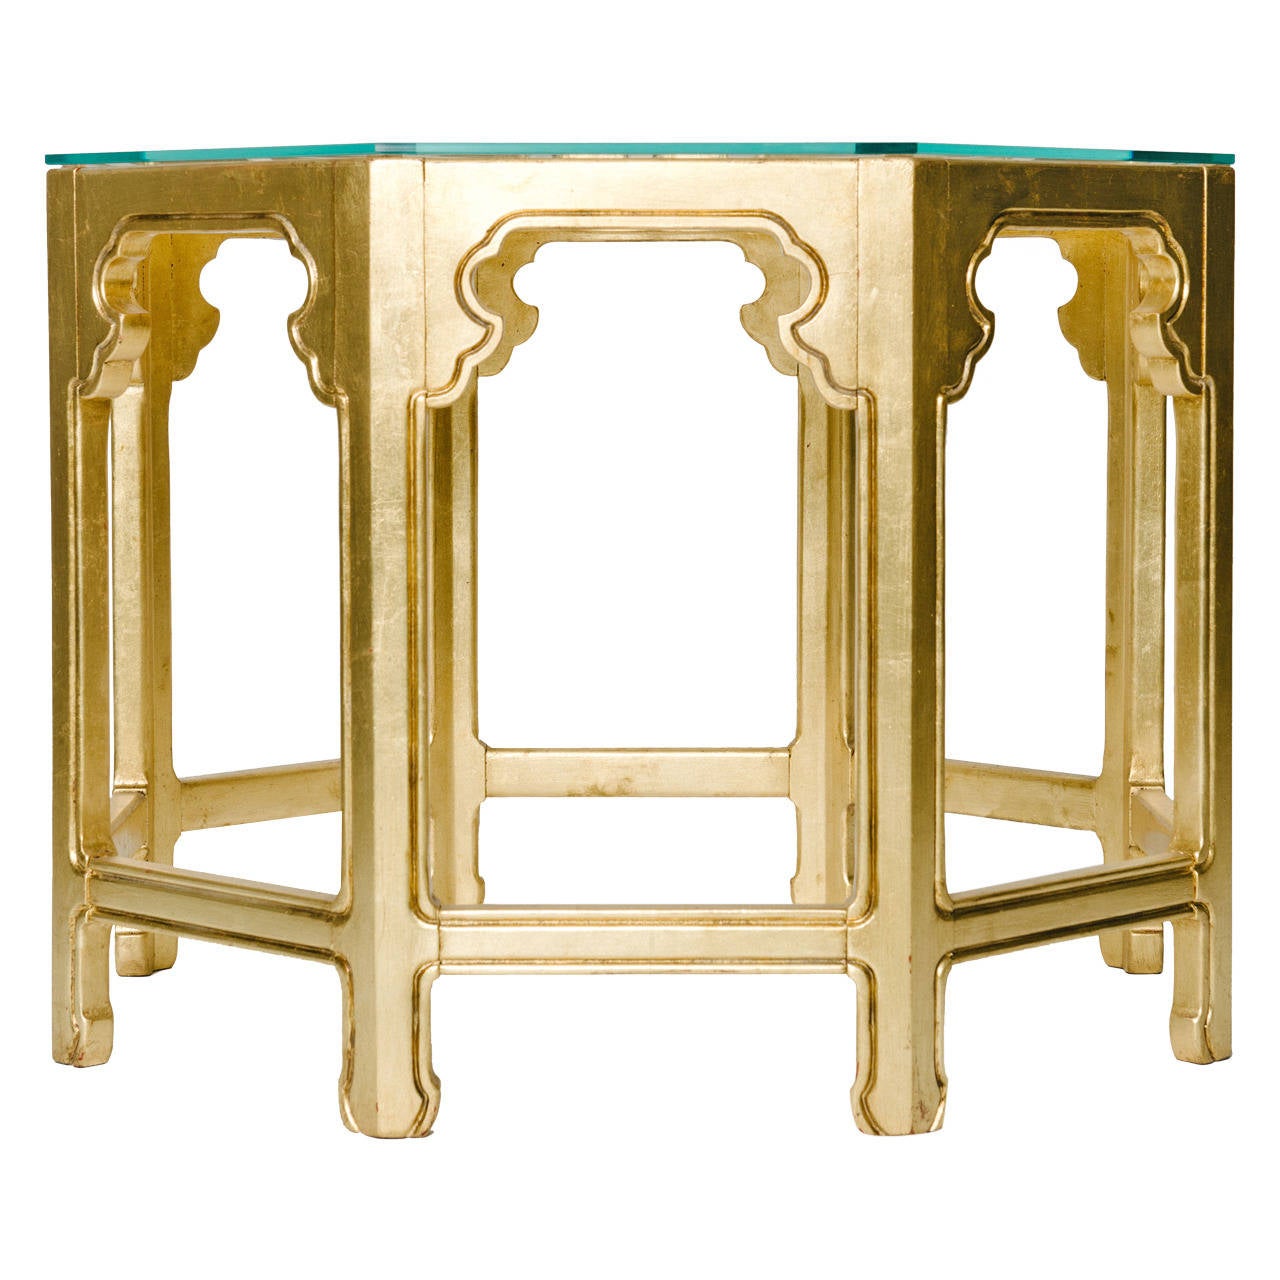 Vintage giltwood octagon fret work center table with beveled glass top.